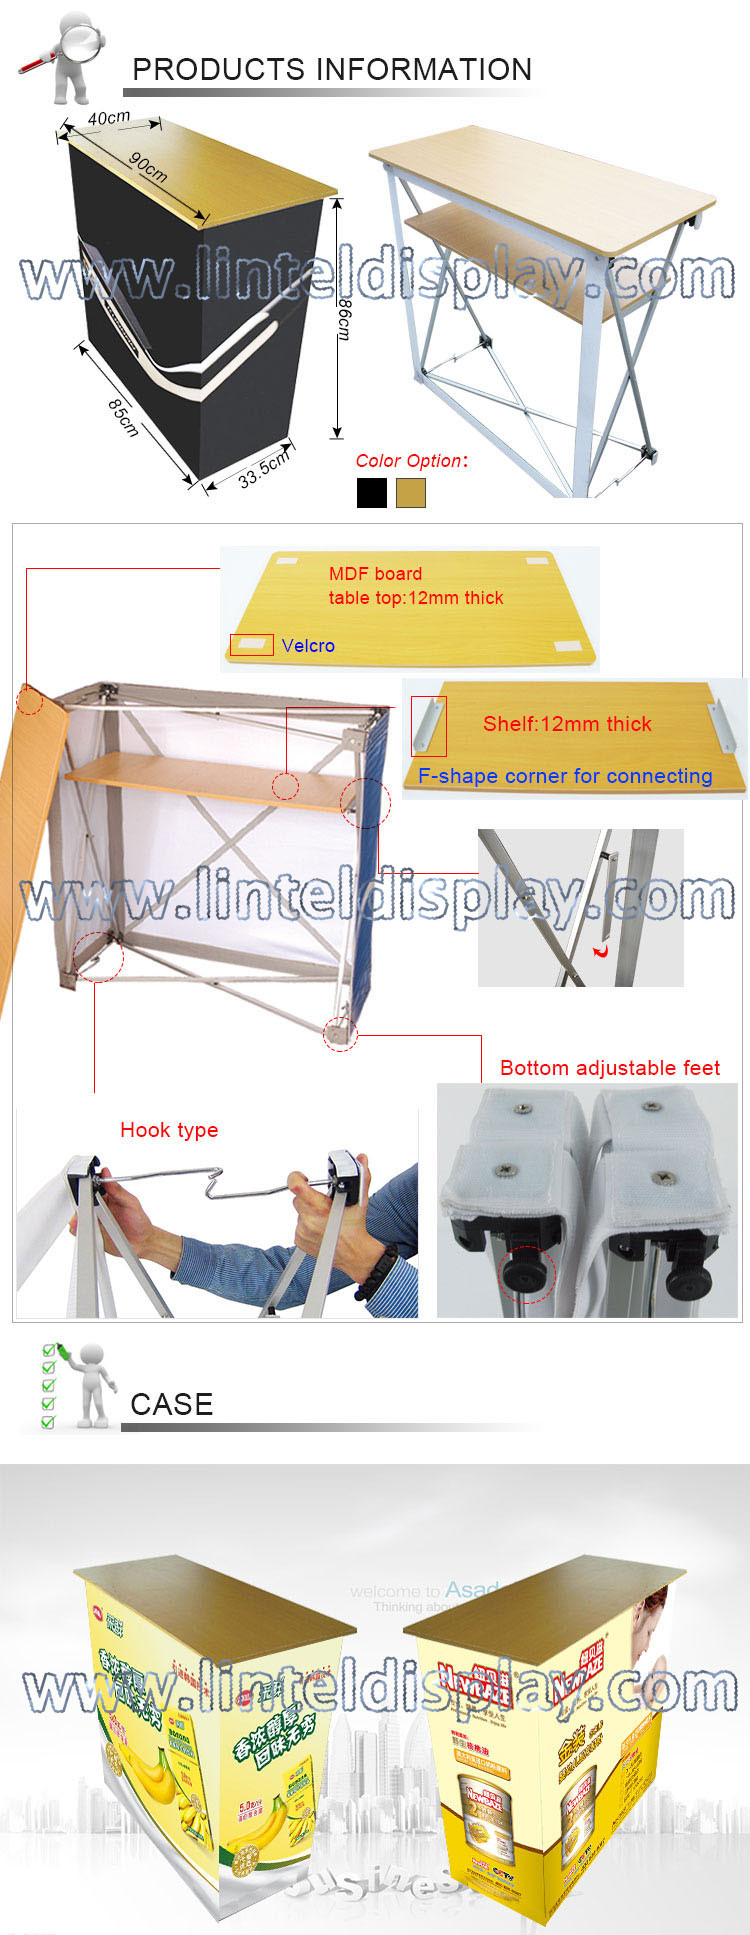 Fabric Trade Show Display Stand Advertising Promotion Table (LT-09B)